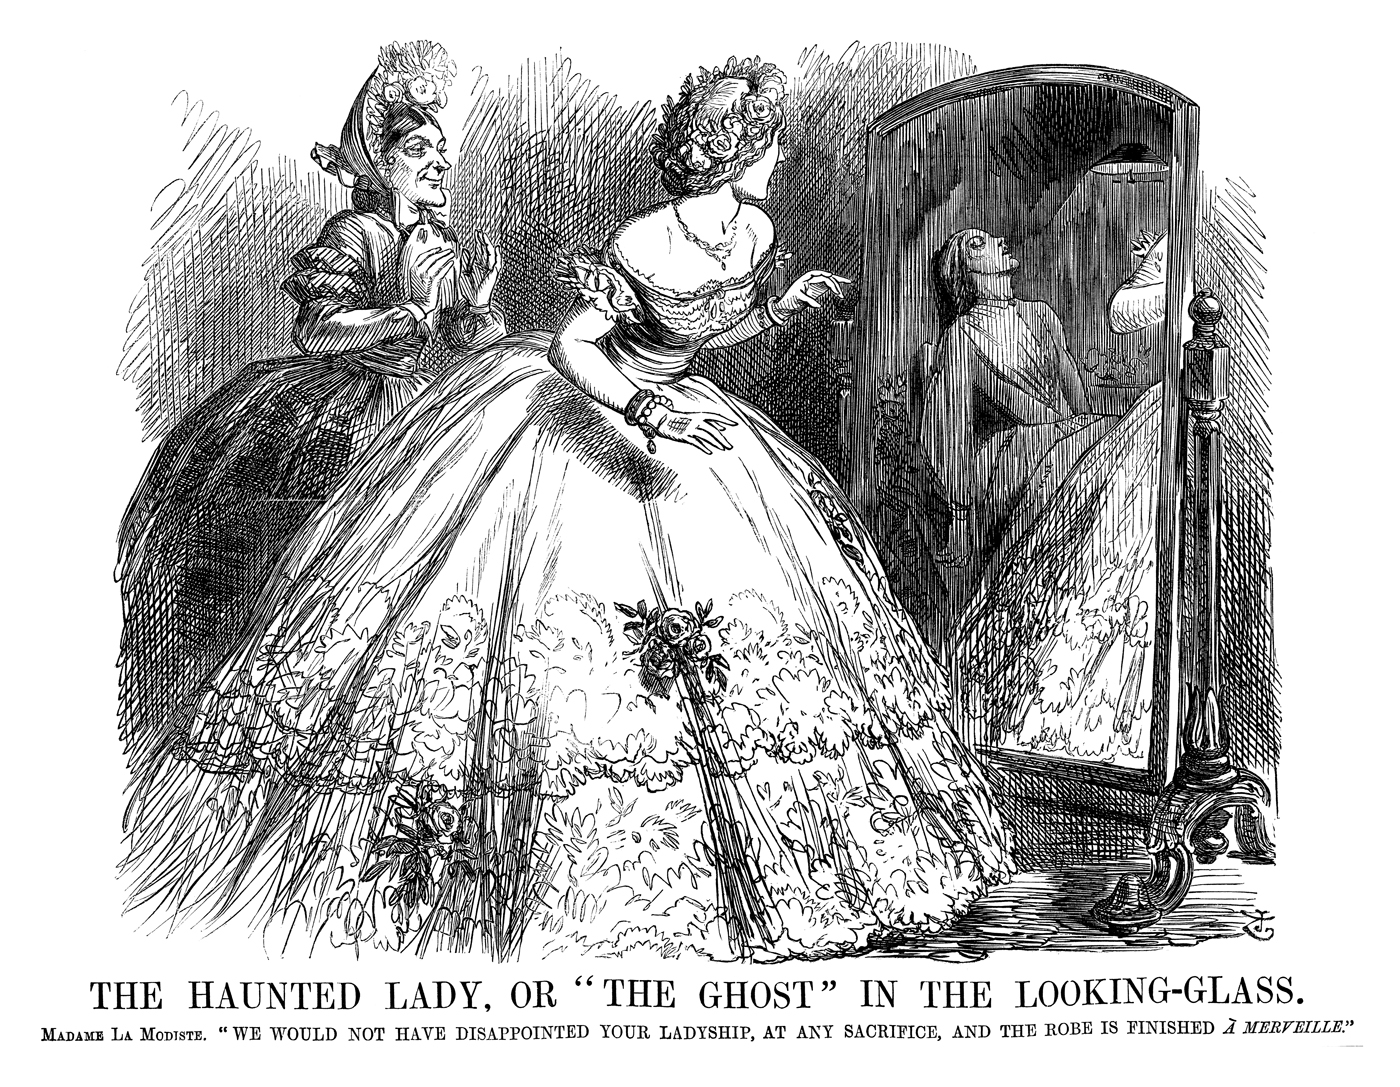 The Haunted Lady, or "The Ghost" in the Looking-glass. Madame La Modiste. "We would not have disappointed your ladyship, at any sacrifice, and the robe is finished a merveille." Published 4 July 1863. By John Tenniel © Punch Ltd